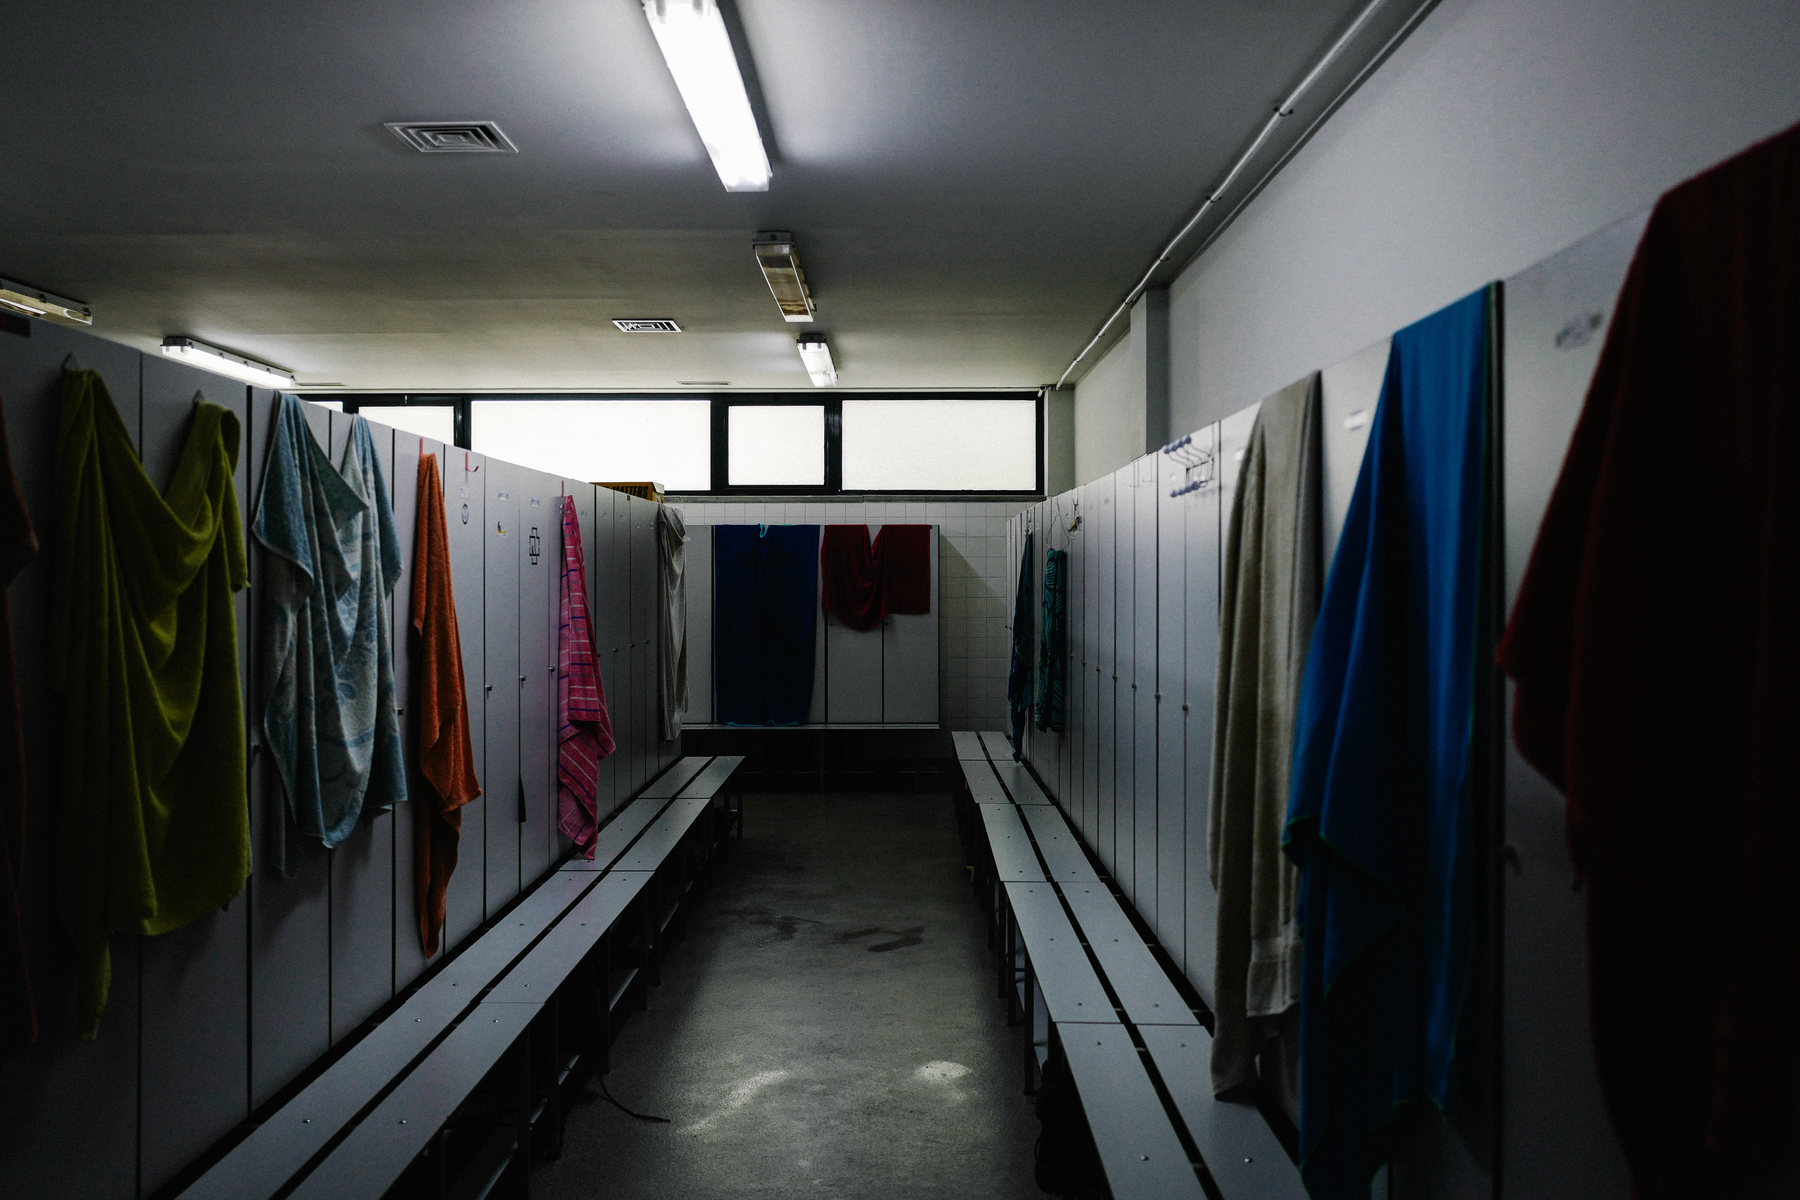 A dimly lit changing room with benches and lockers, towels hanging from the partitions and the bench.